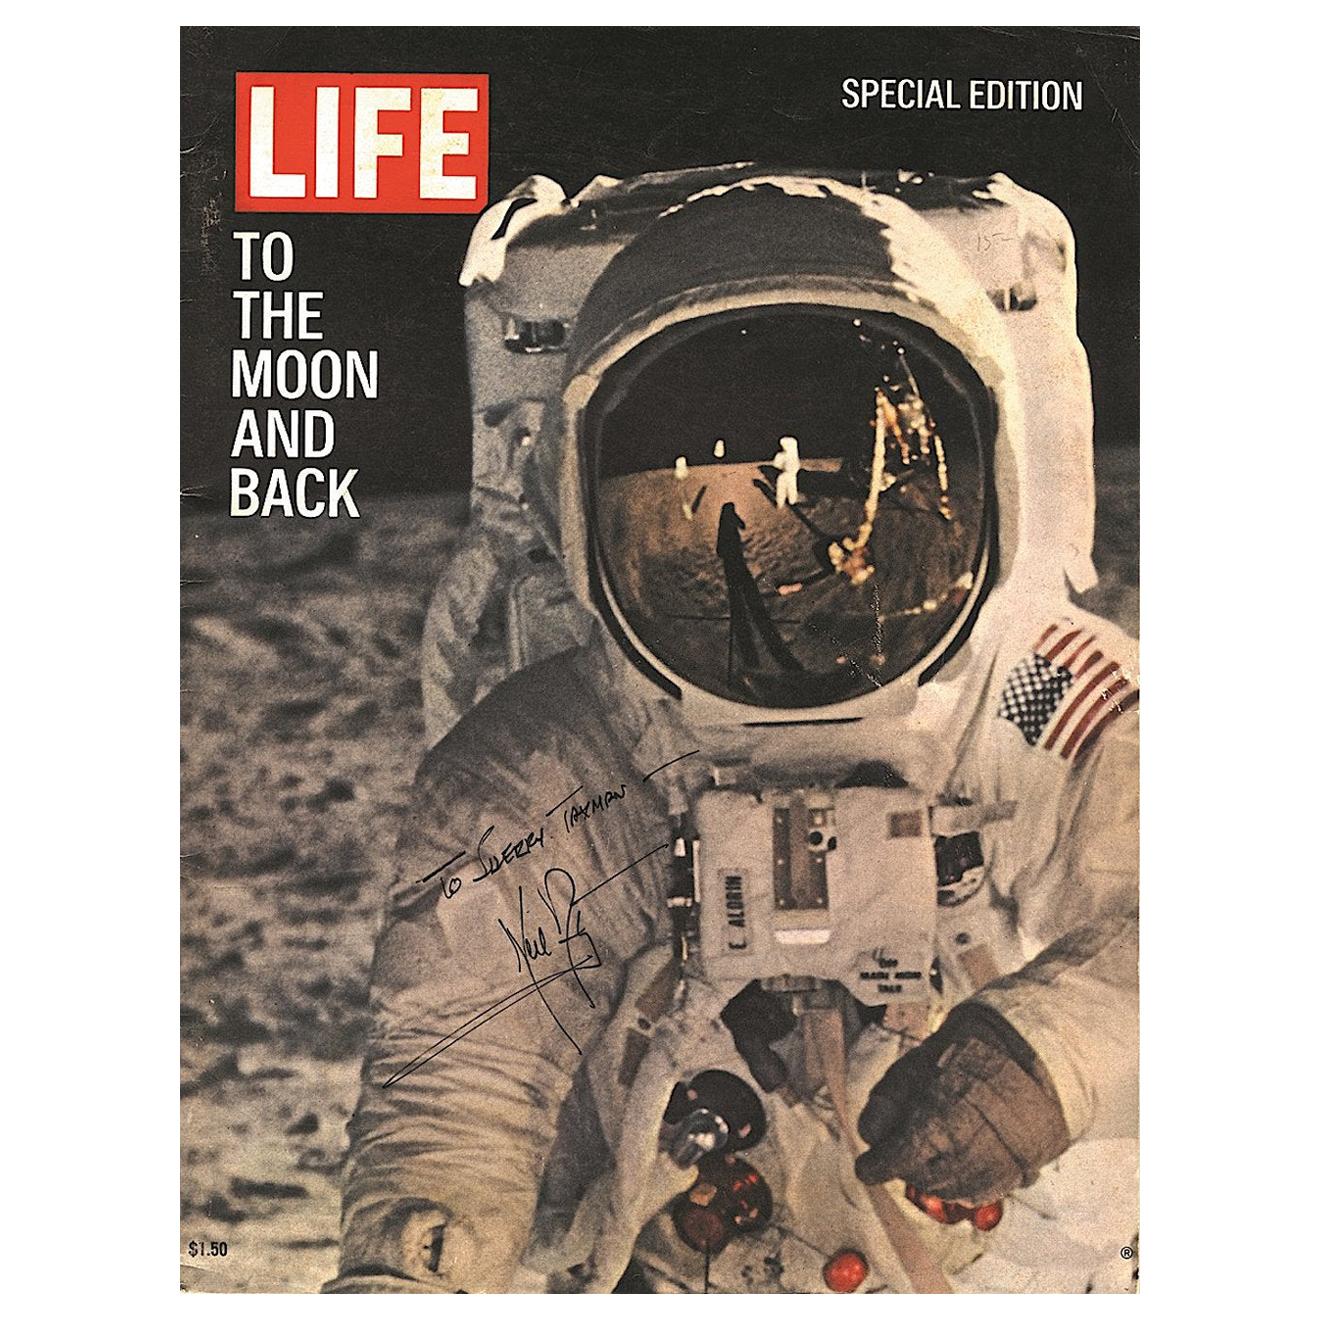 Neil Armstrong Signed Copy of Life Magazine, 1960s / 1970s